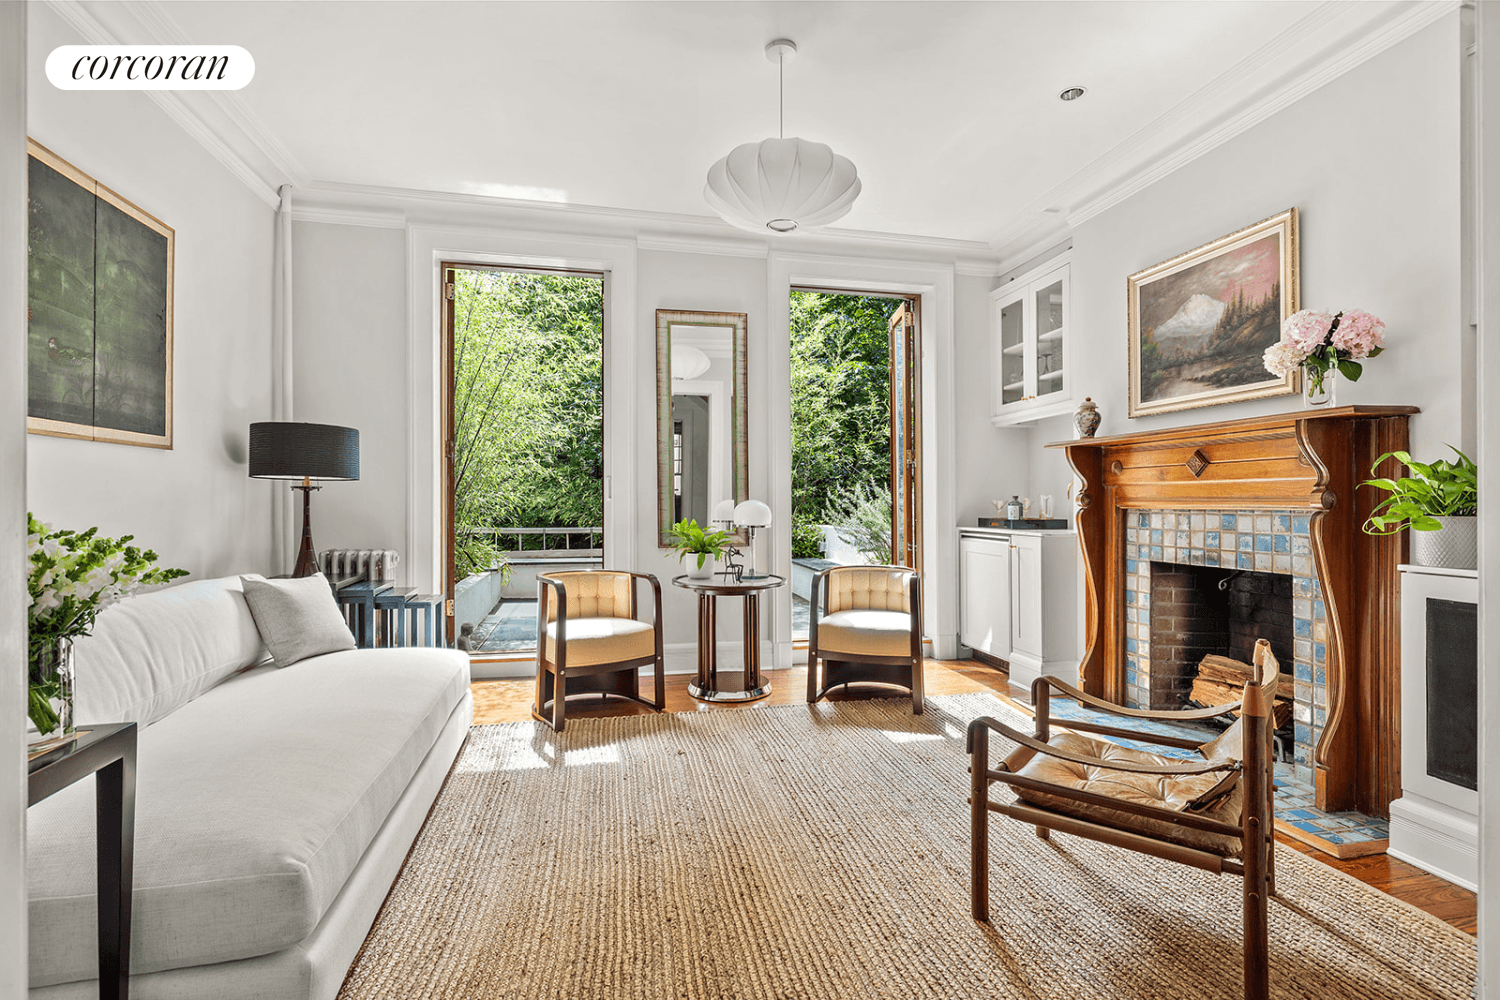 NEW ! On one of Cobble Hill's most idyllic and charming blocks, sits 39 Strong Place, an undeniably special, four story, single family townhouse with a nod to the Arts ...